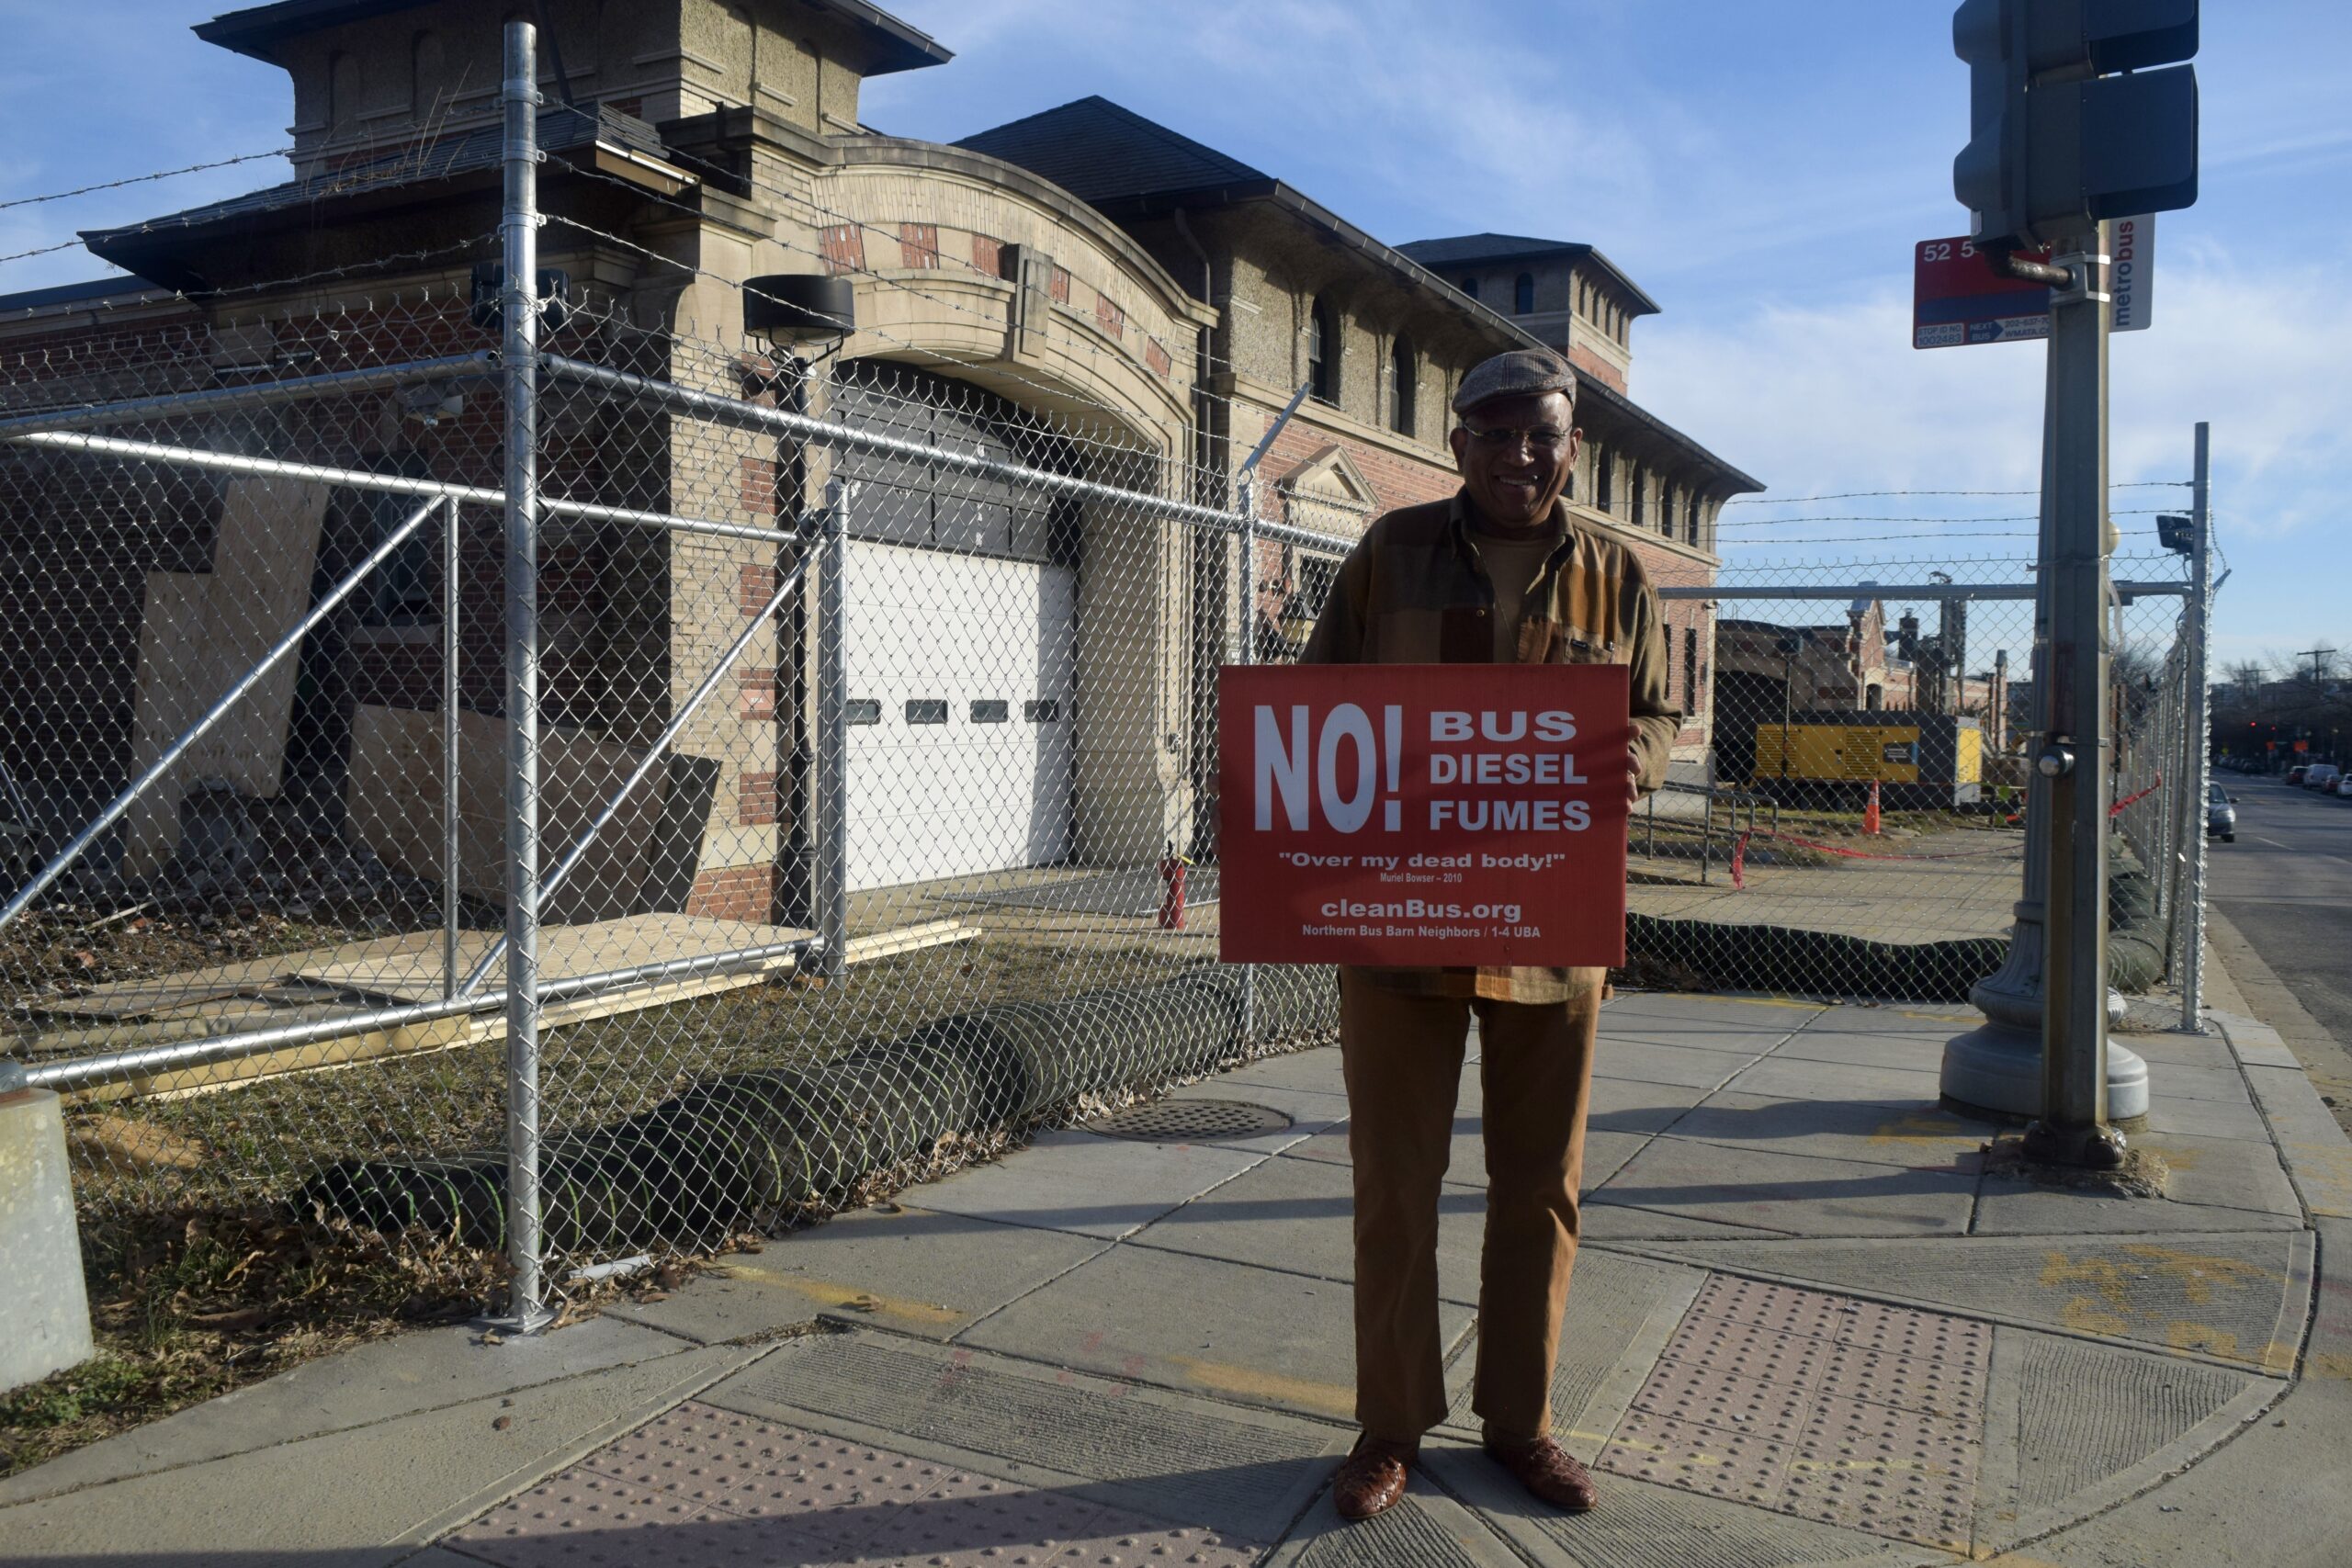 A man holds a red sign that says "NO! BUS DIESEL FUMES" outside of a brick building surrounded by wiring fencing.